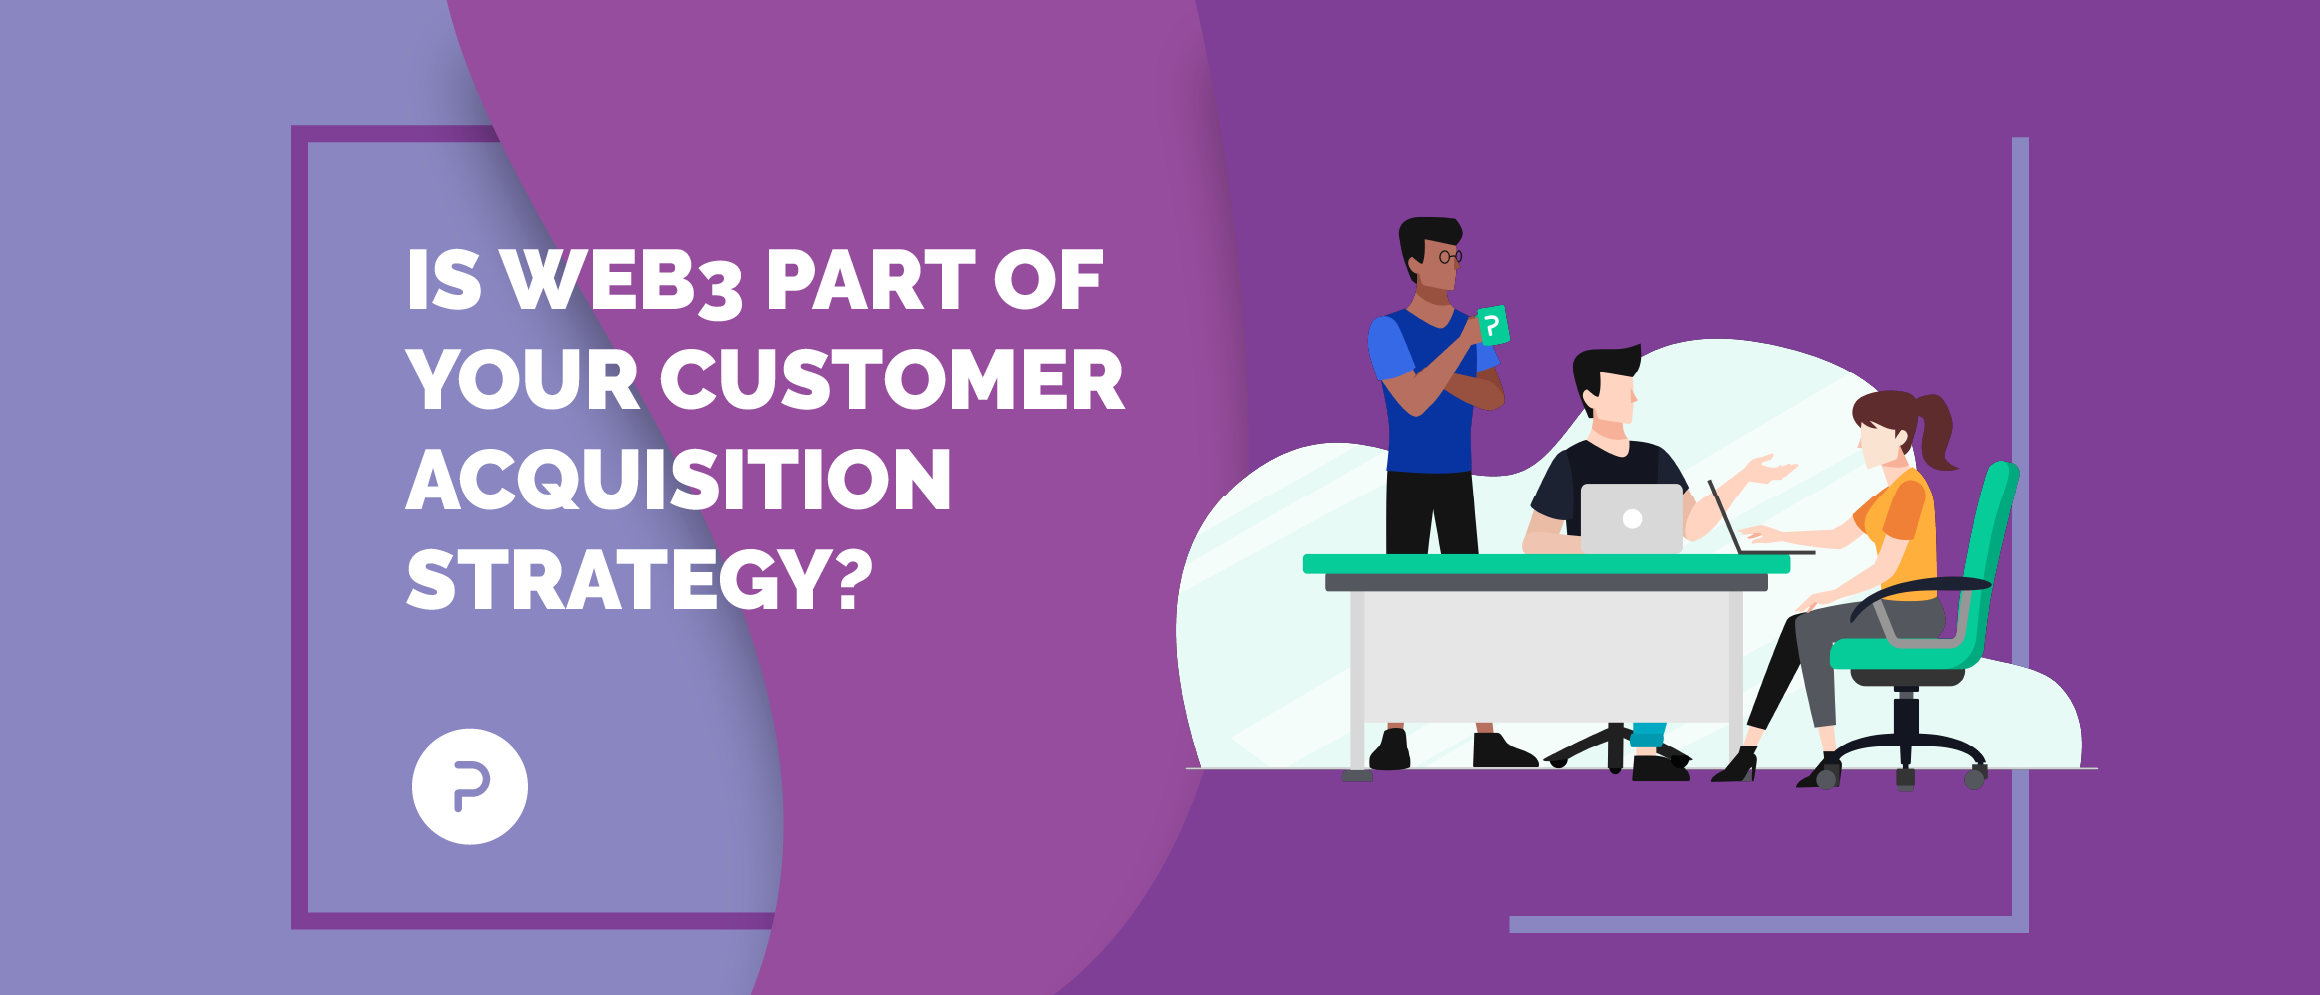 Is Web3 Part Of Your Customer Acquisition Strategy?